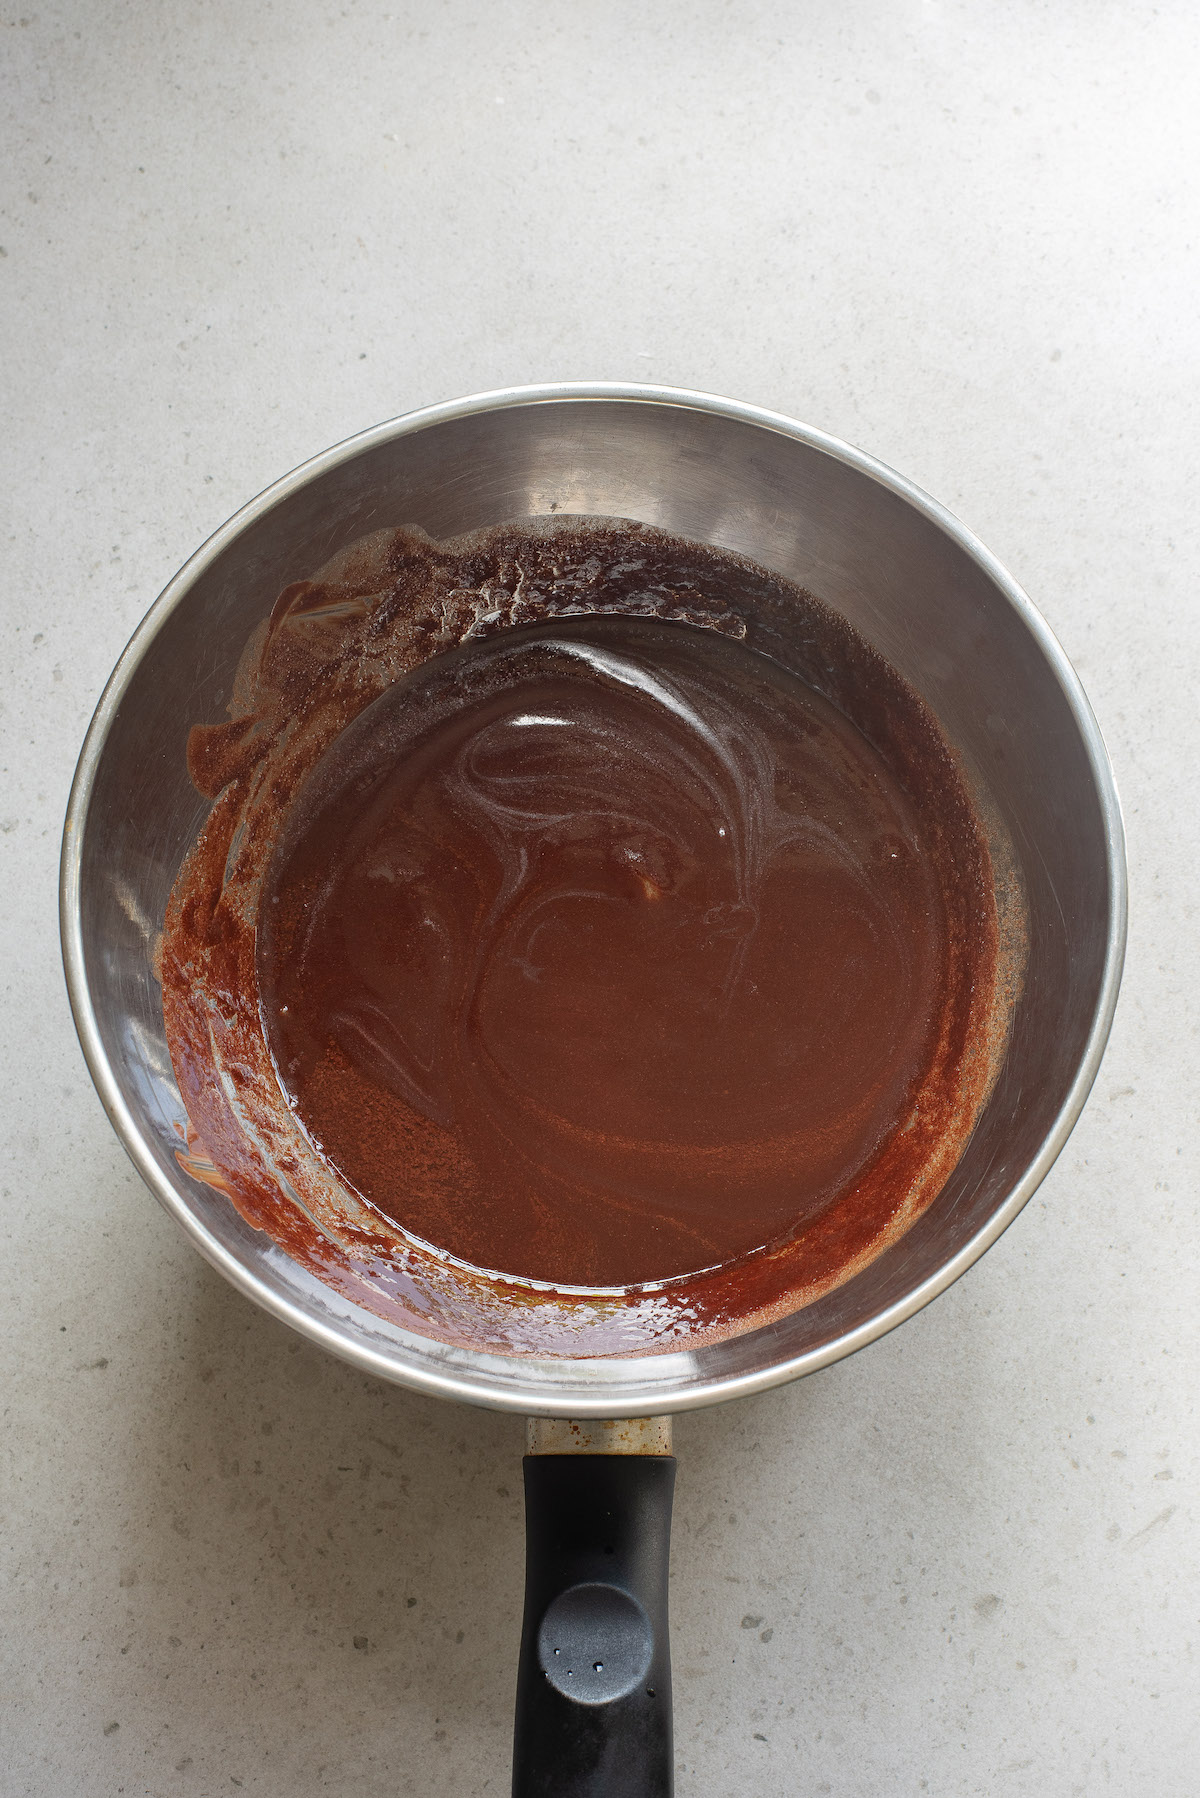 the metled chocolate mixture in a pan